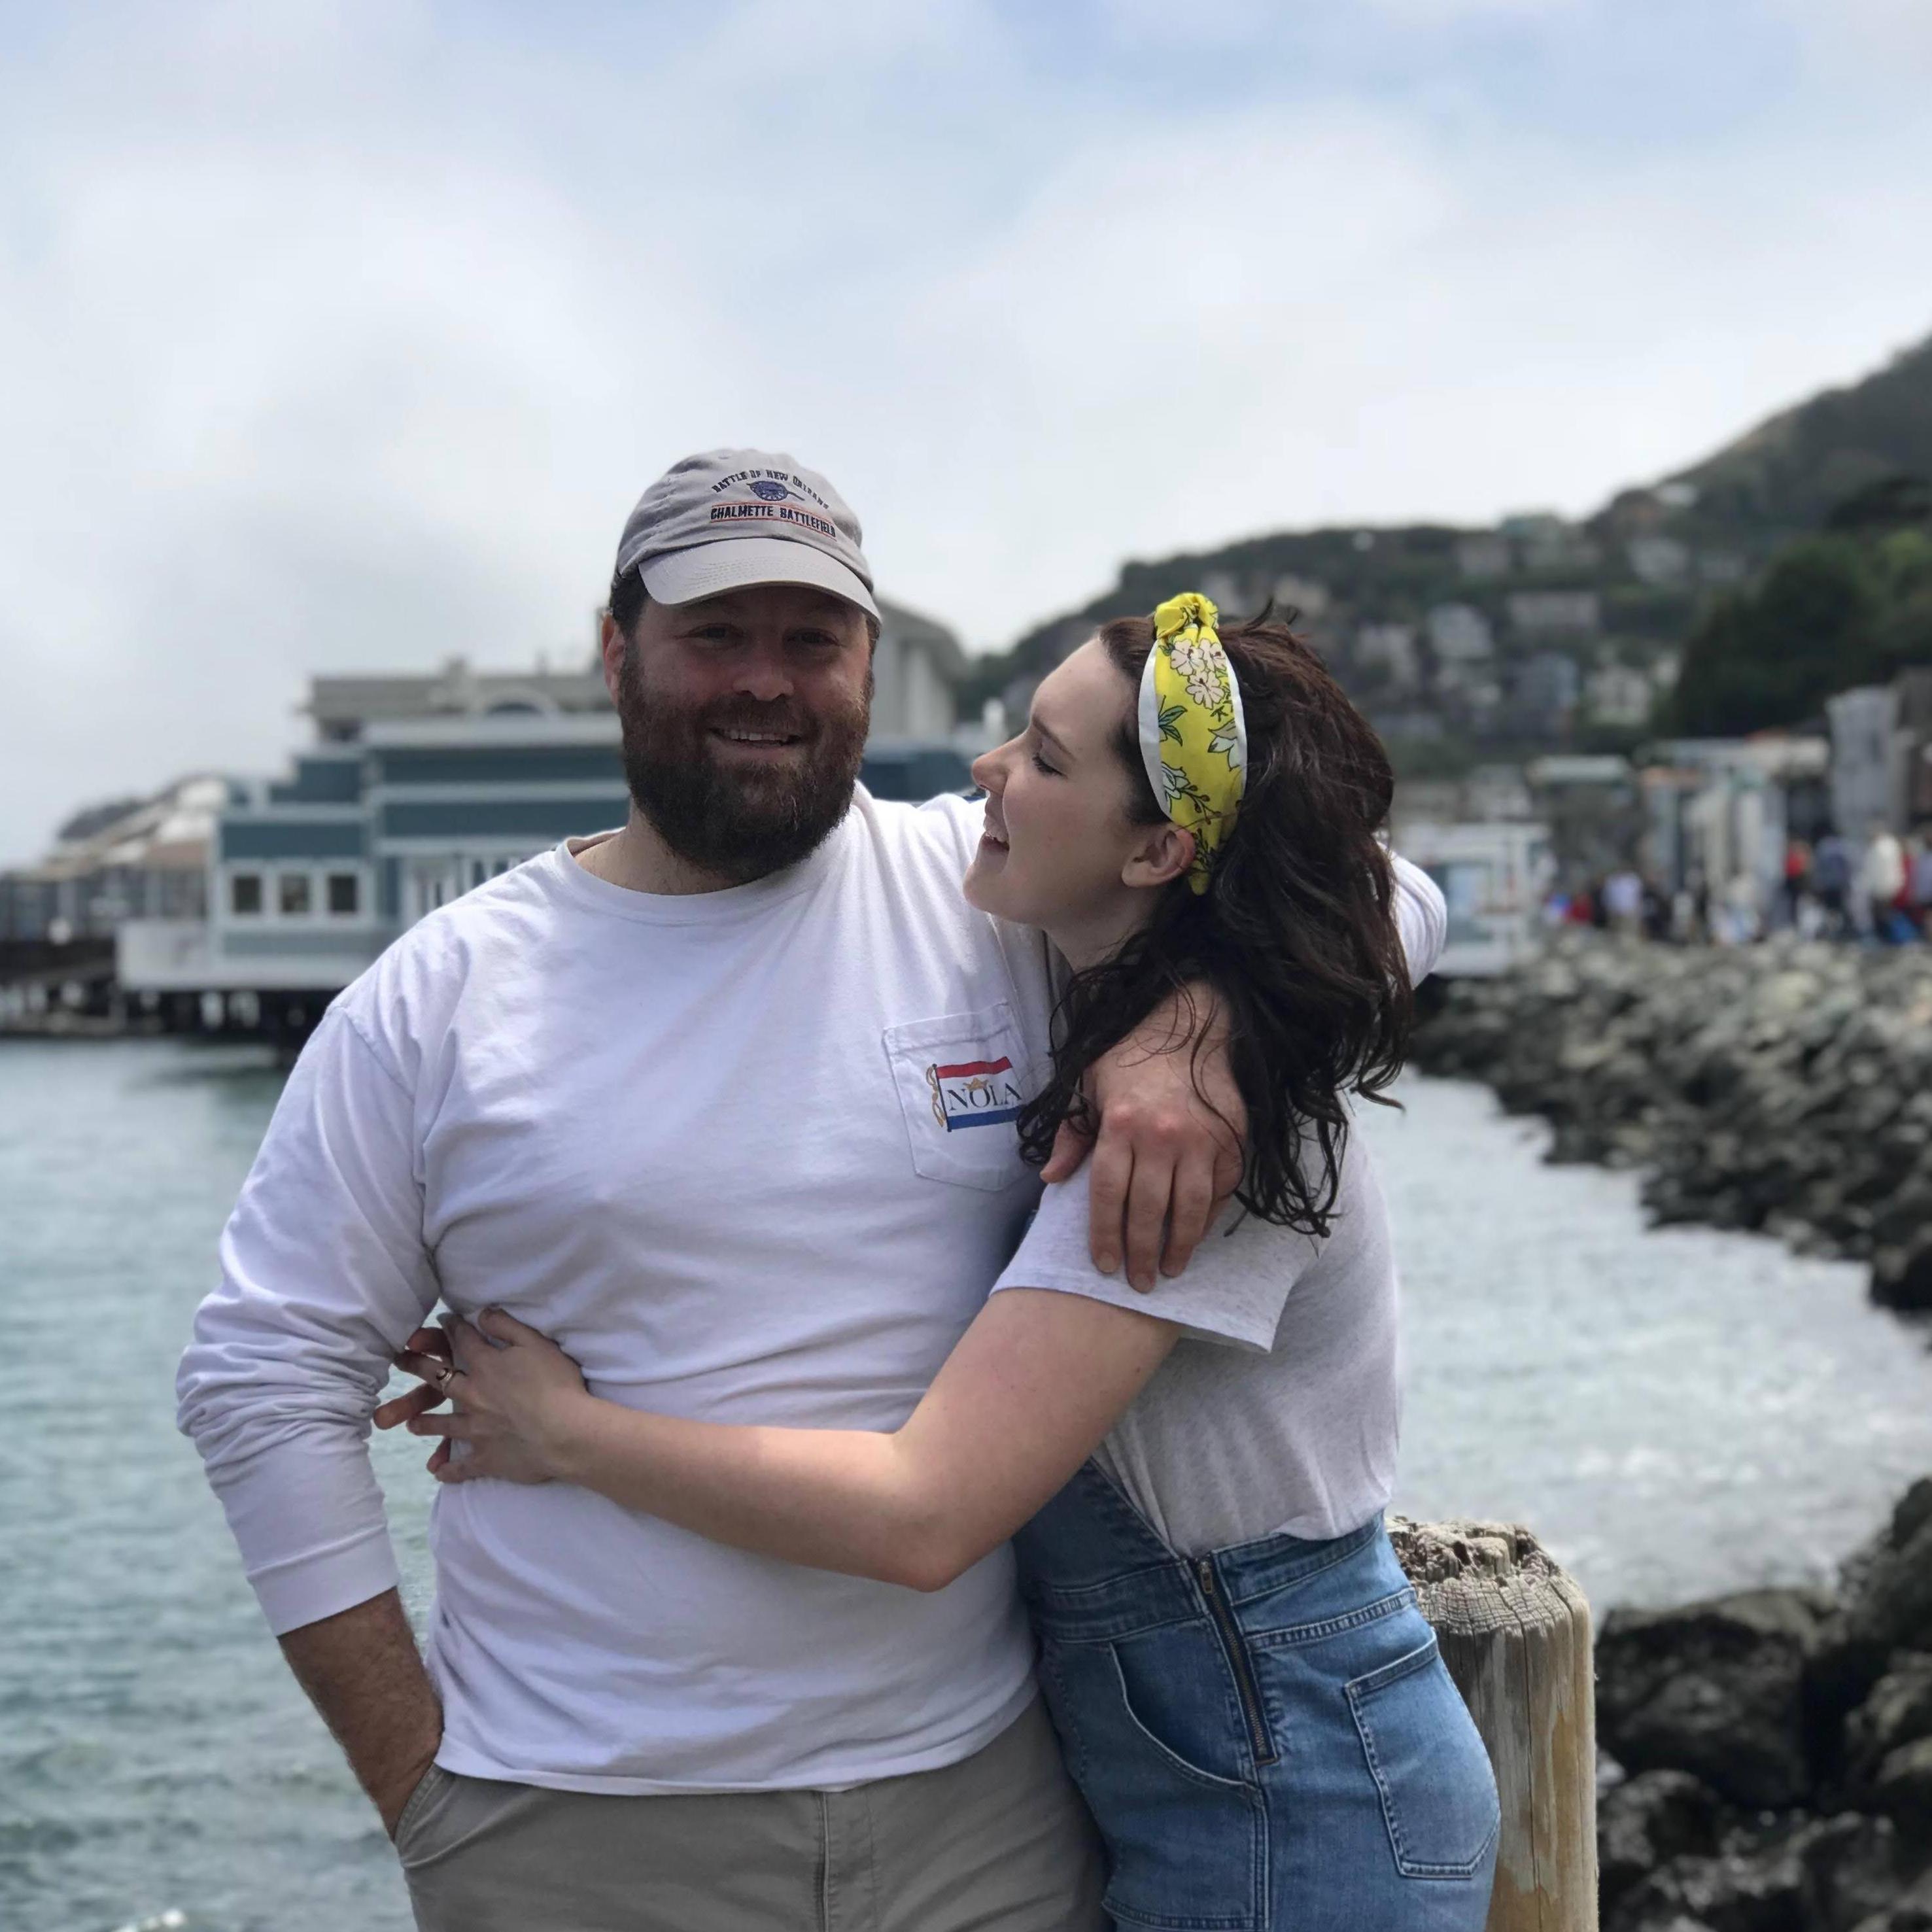 In July 2018 Sam surprised Matty with tickets to San Francisco! Here we are on the dock in Sausalito!